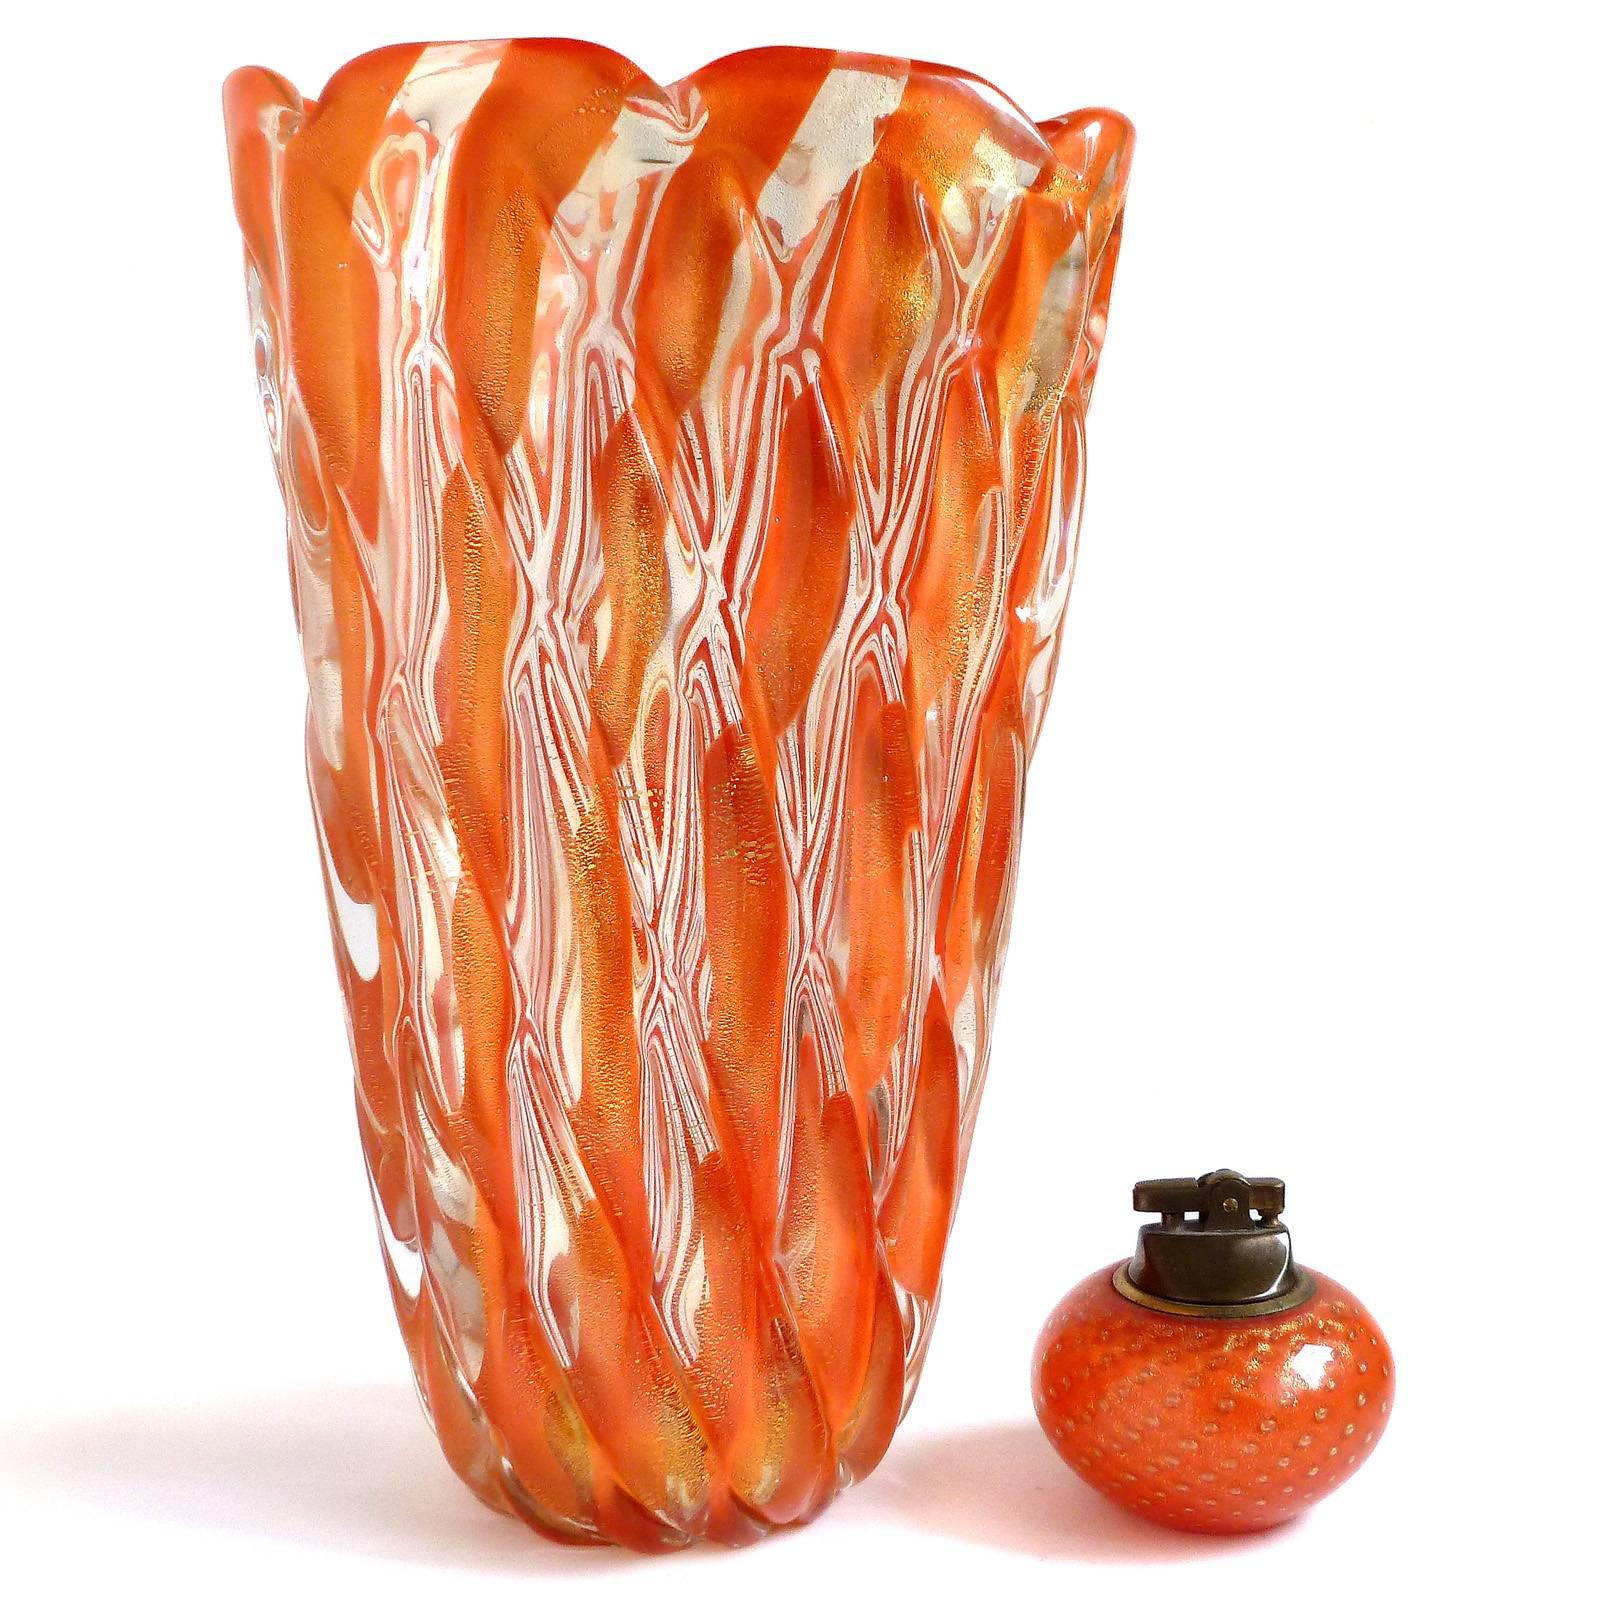 Gorgeous large Murano handblown orange stripes and gold flecks Italian art glass pillow quilted surface flower vase. Documented to designer Alfredo Barbini, circa 1950s (published in his catalogue). An impressive and rare piece. Mid century era.